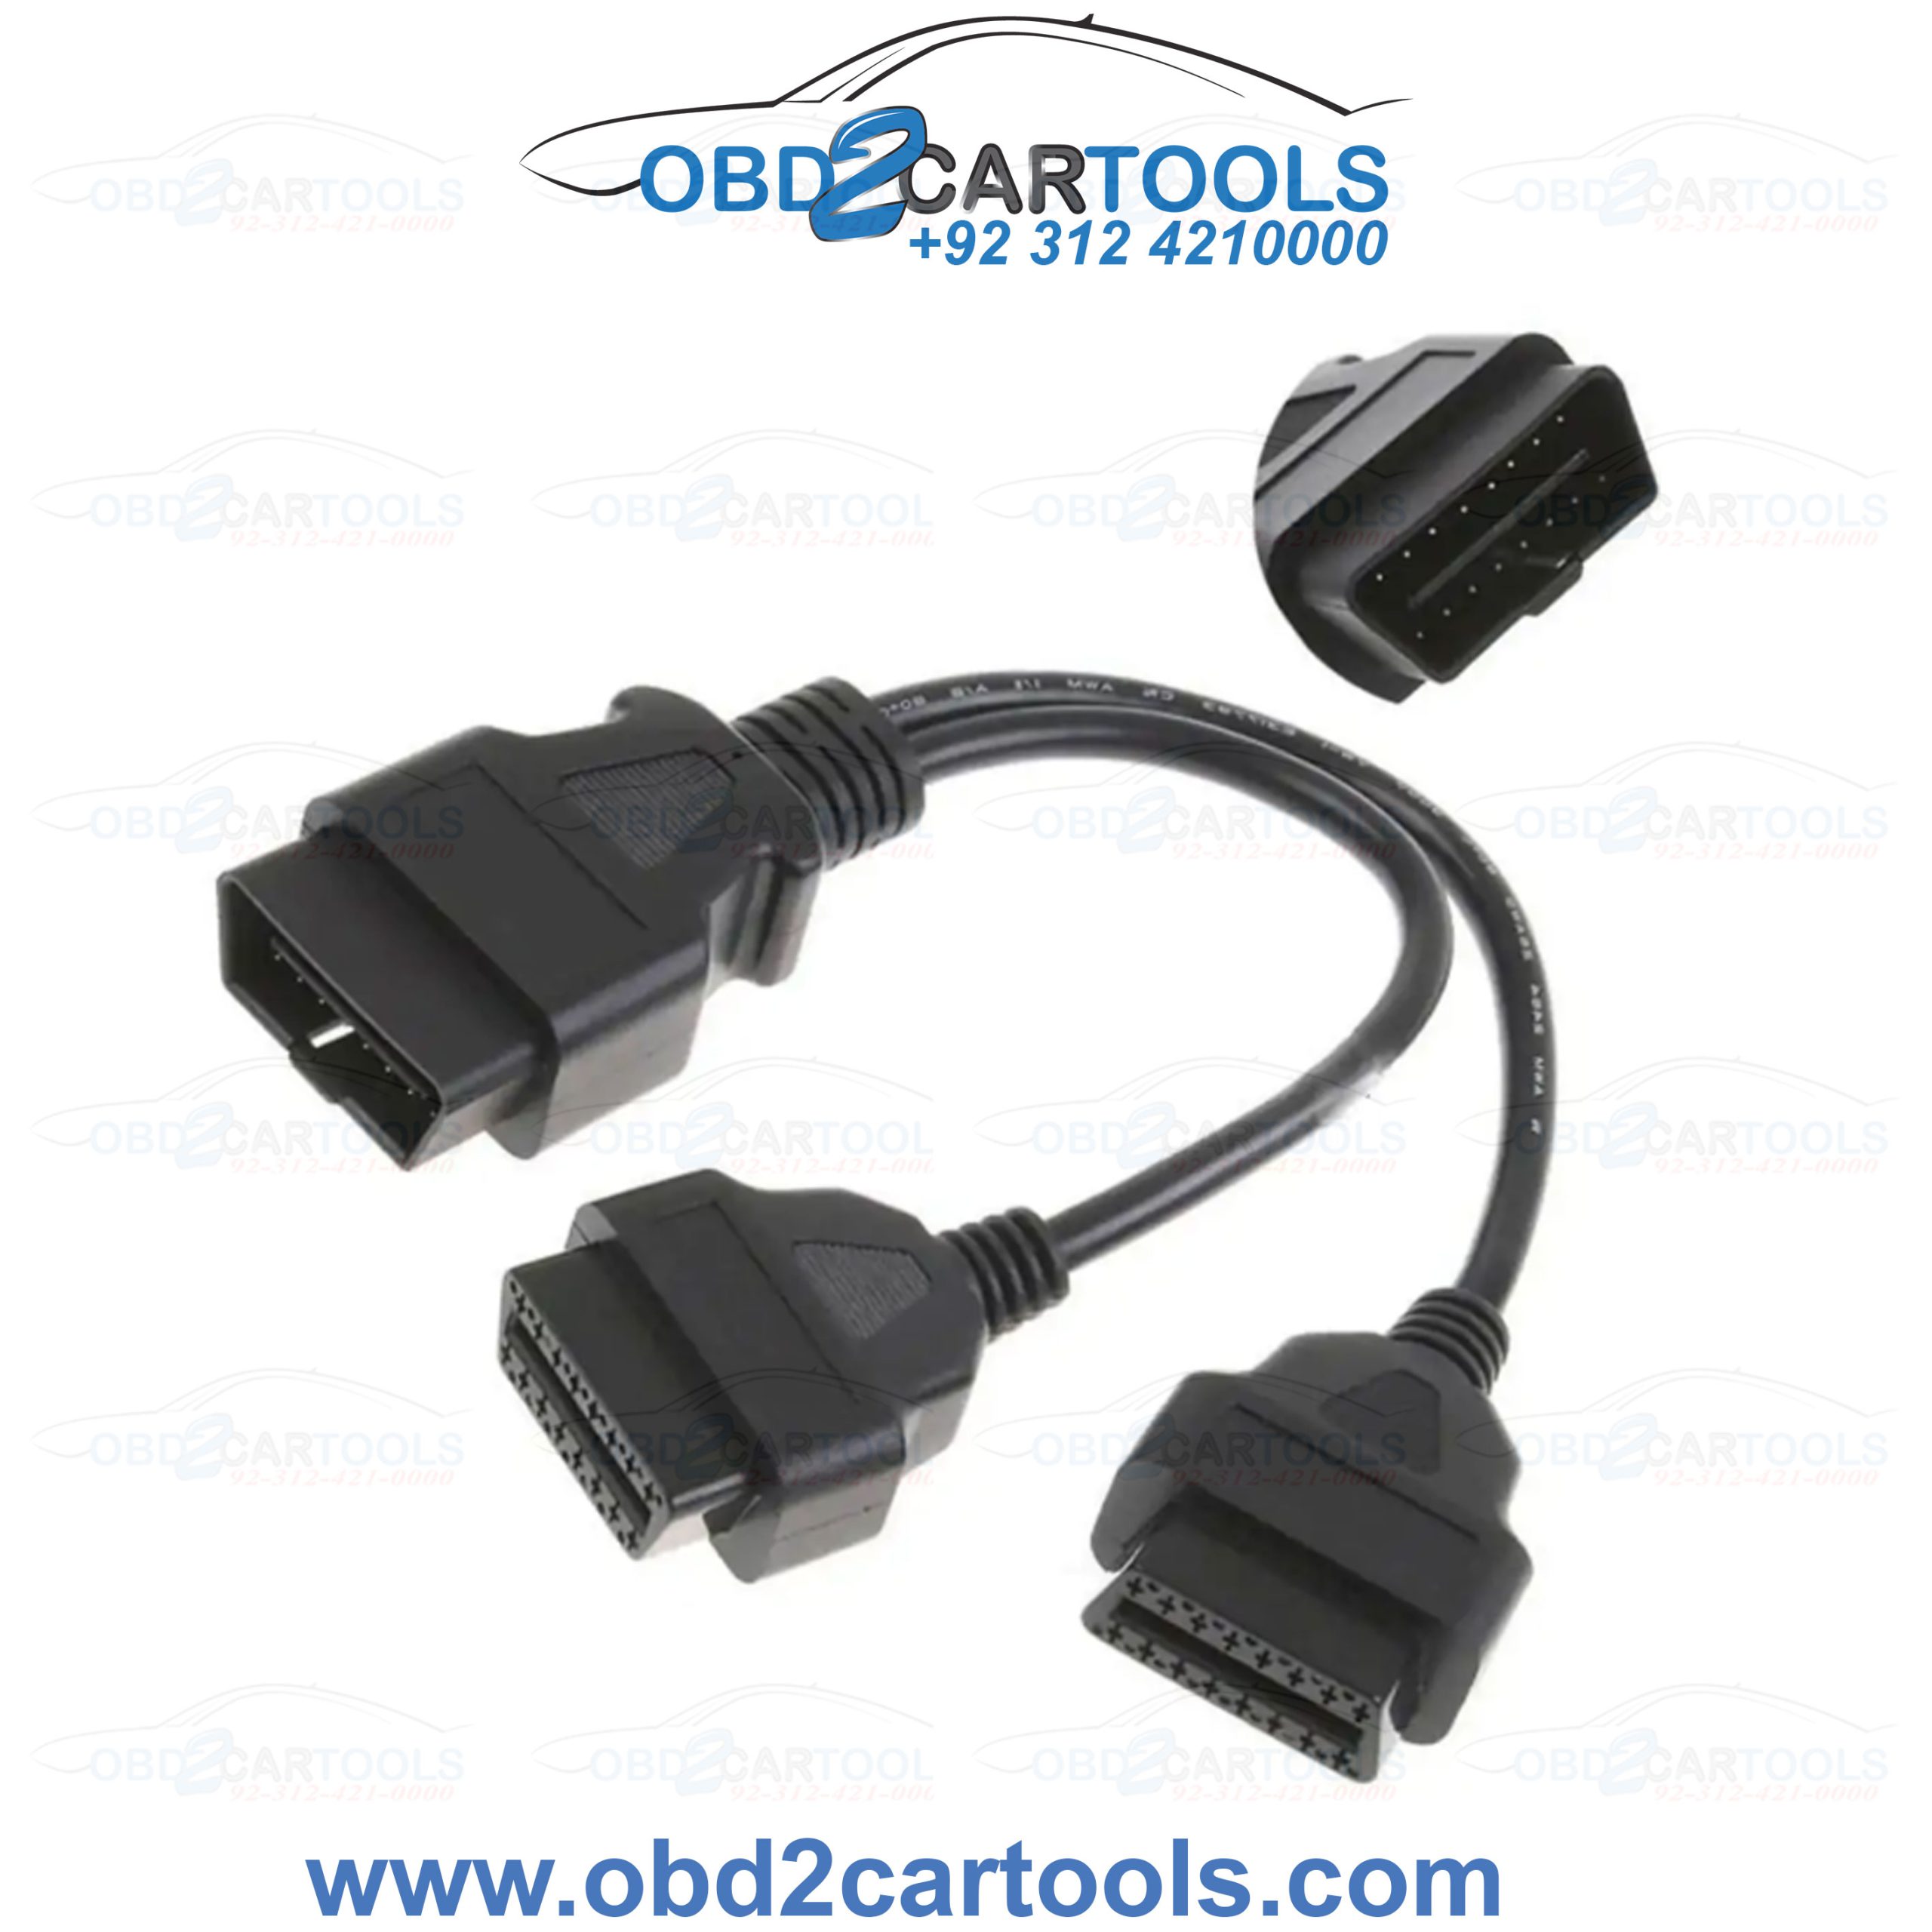 Product image for OBD2 16pin male to 2 female OBD2 Splitter Cable for Diagnostic Extender